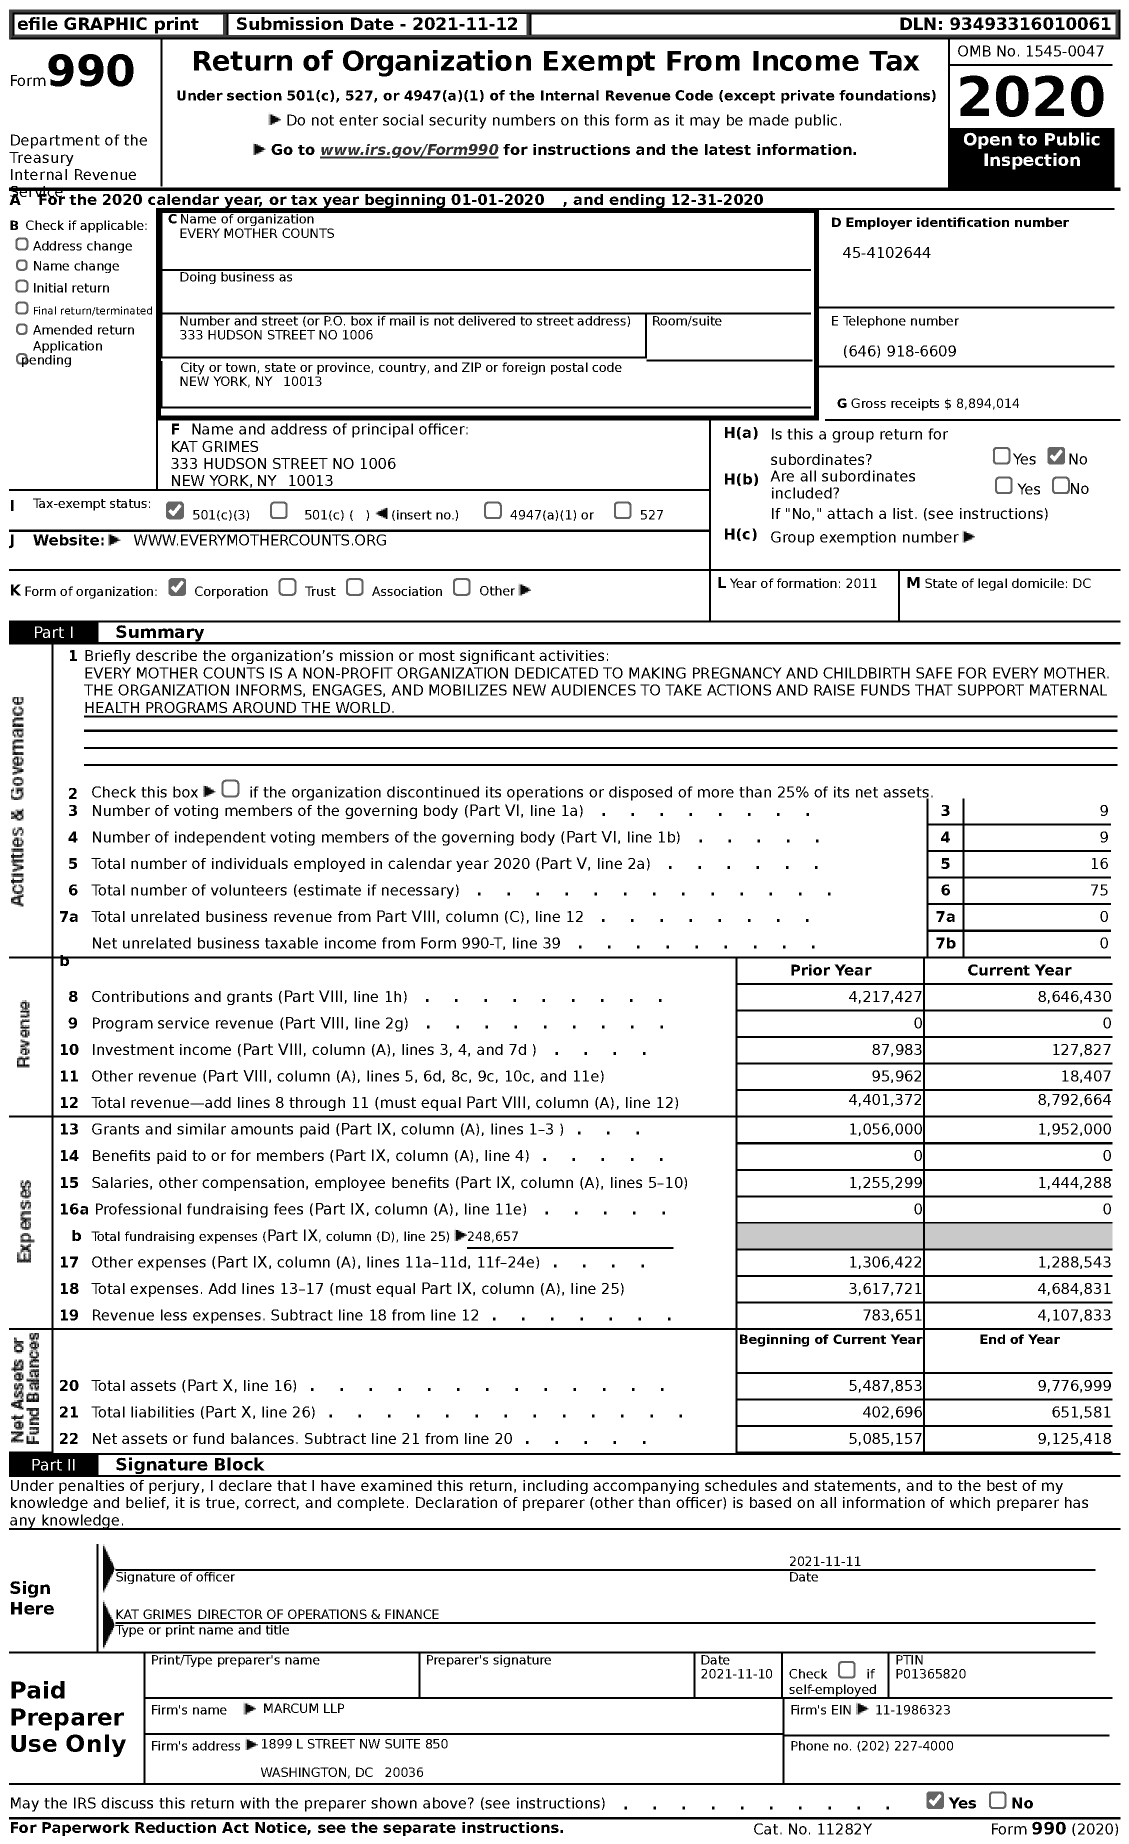 Image of first page of 2020 Form 990 for Every Mother Counts (EMC)